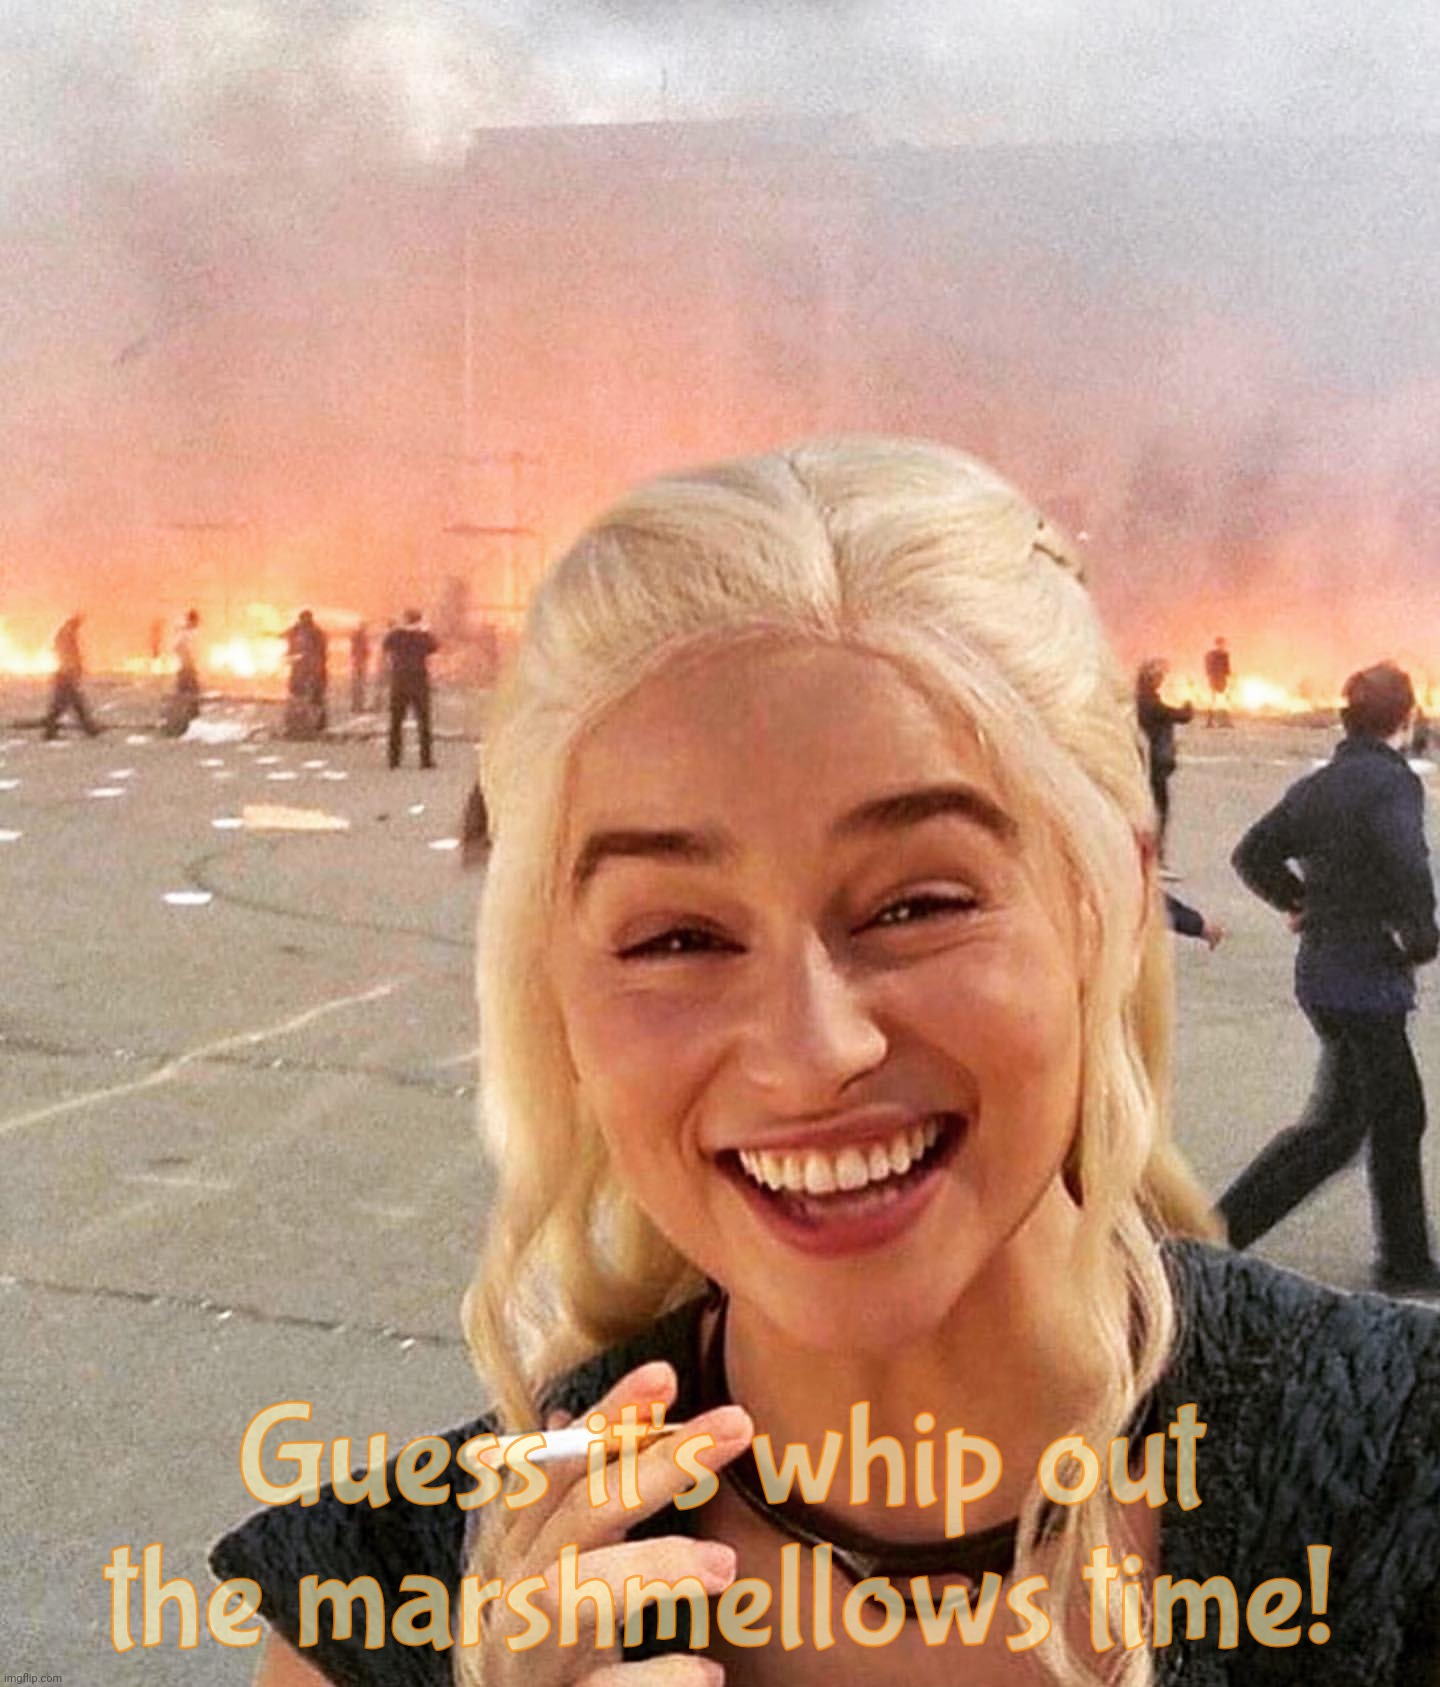 disaster smoker girl | Guess it's whip out the marshmellows time! | image tagged in disaster smoker girl | made w/ Imgflip meme maker